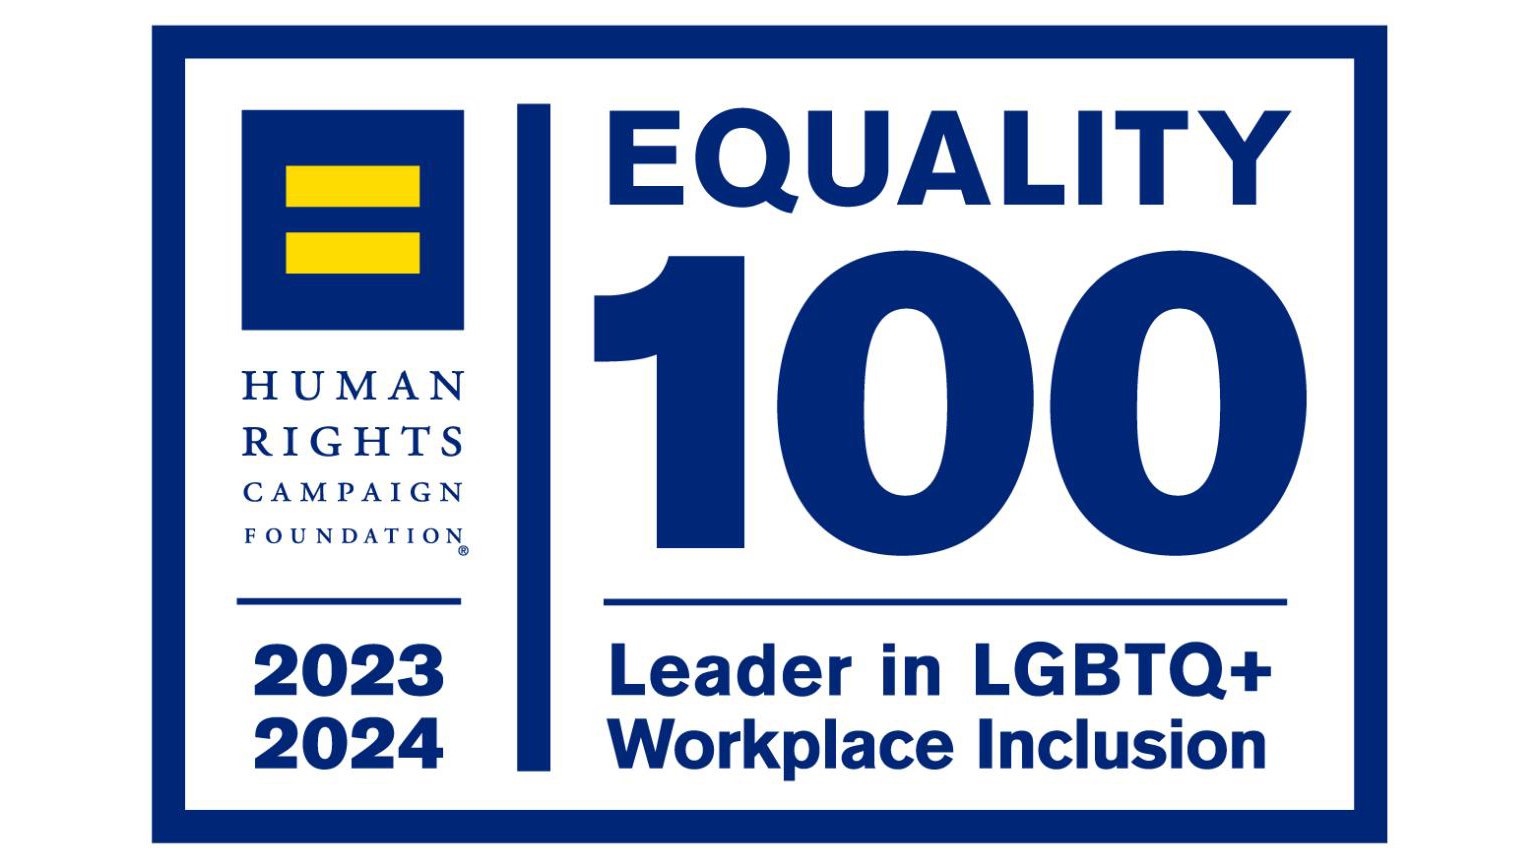 Equality 100 LGBTQ+ Human Rights Campaign Foundation